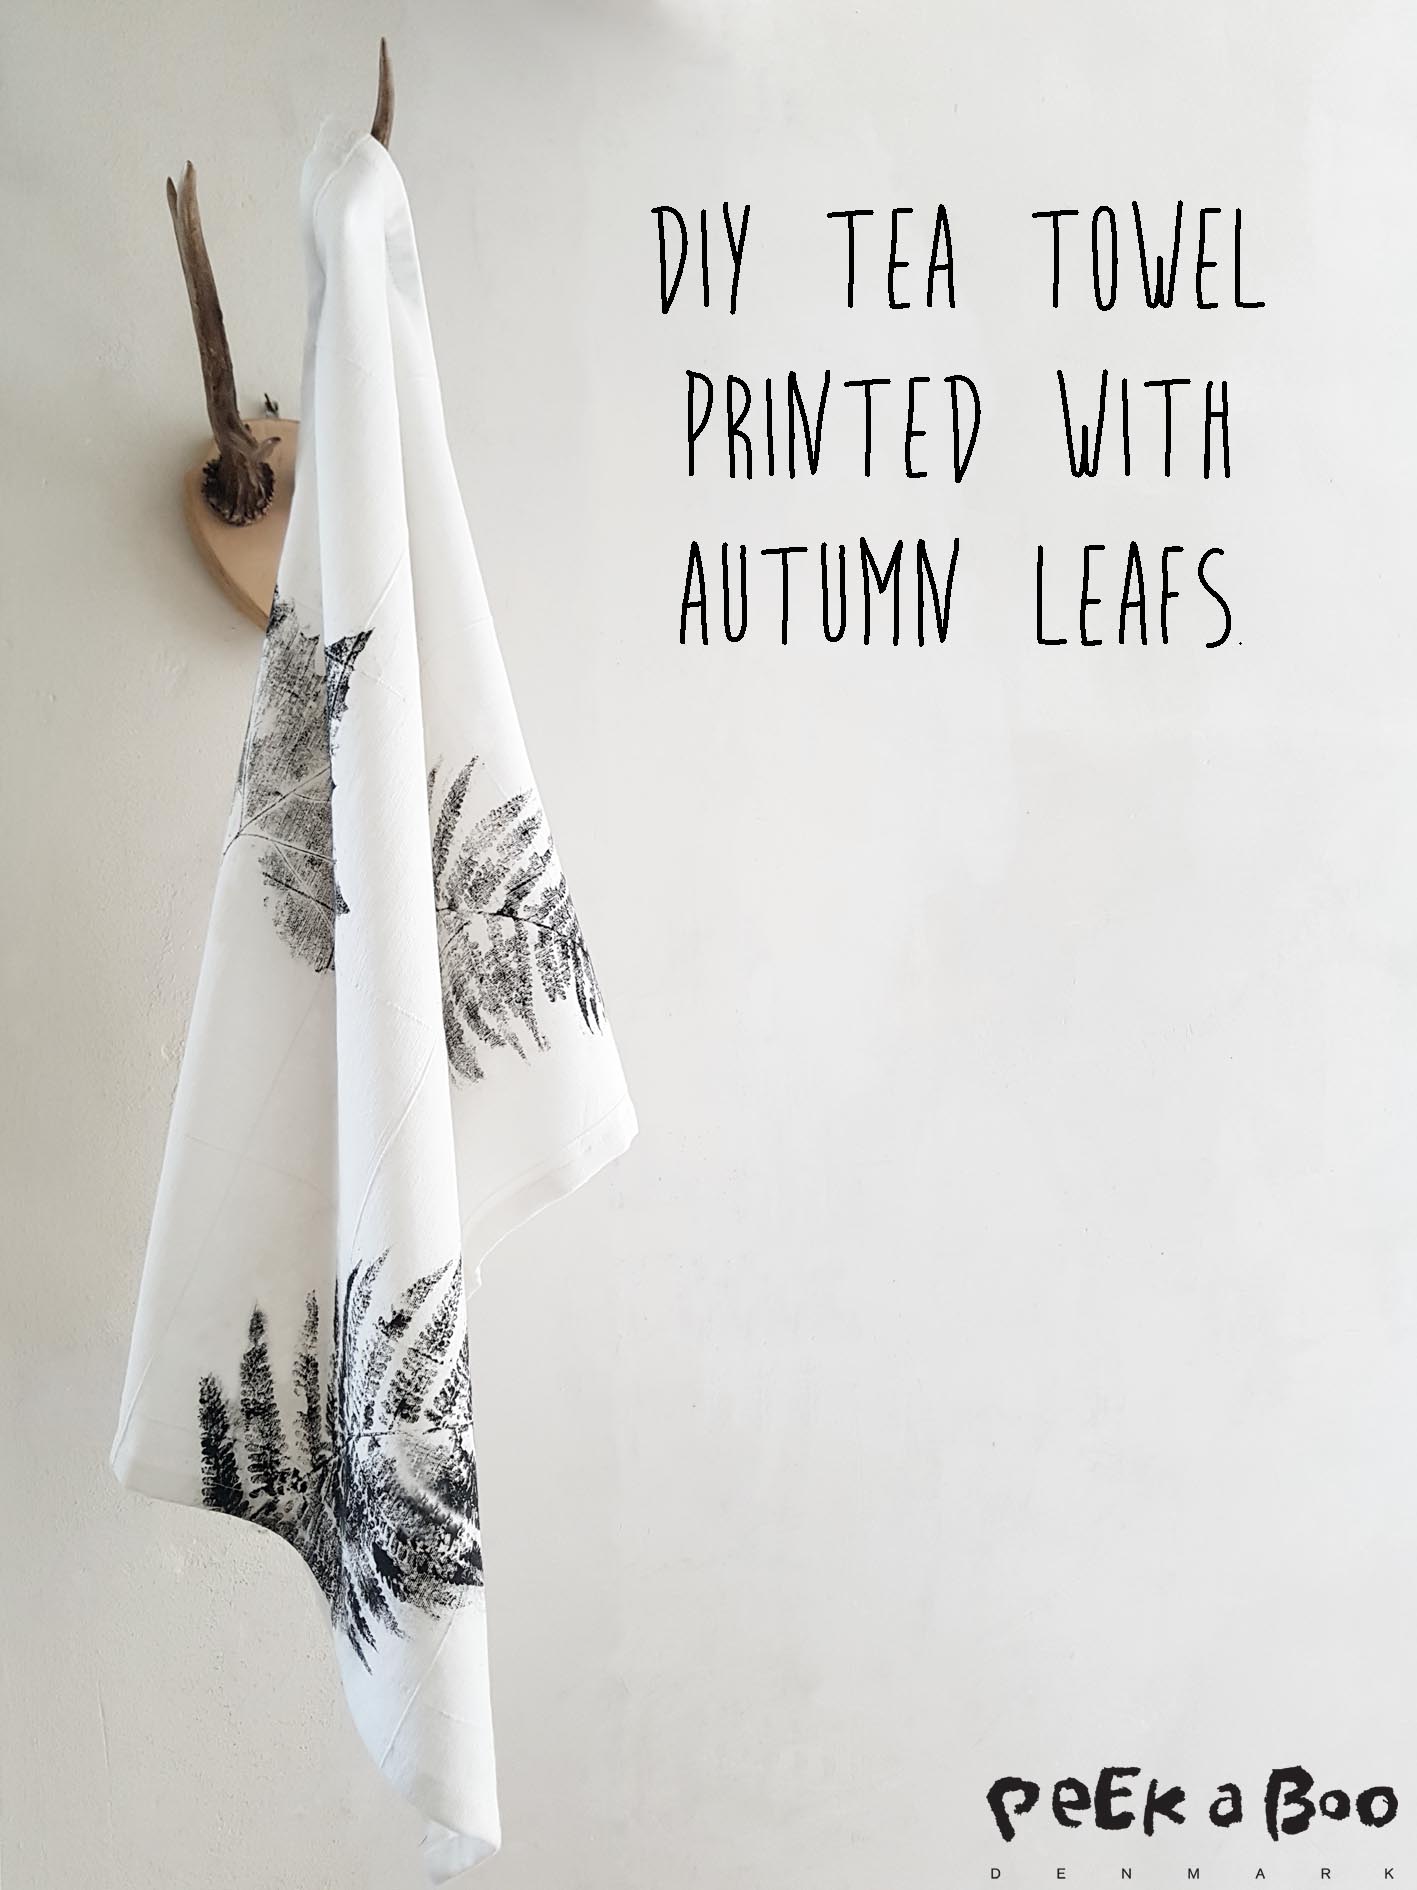 Tea towel with printed autumn leafs. Easy craft you can do with your kids.